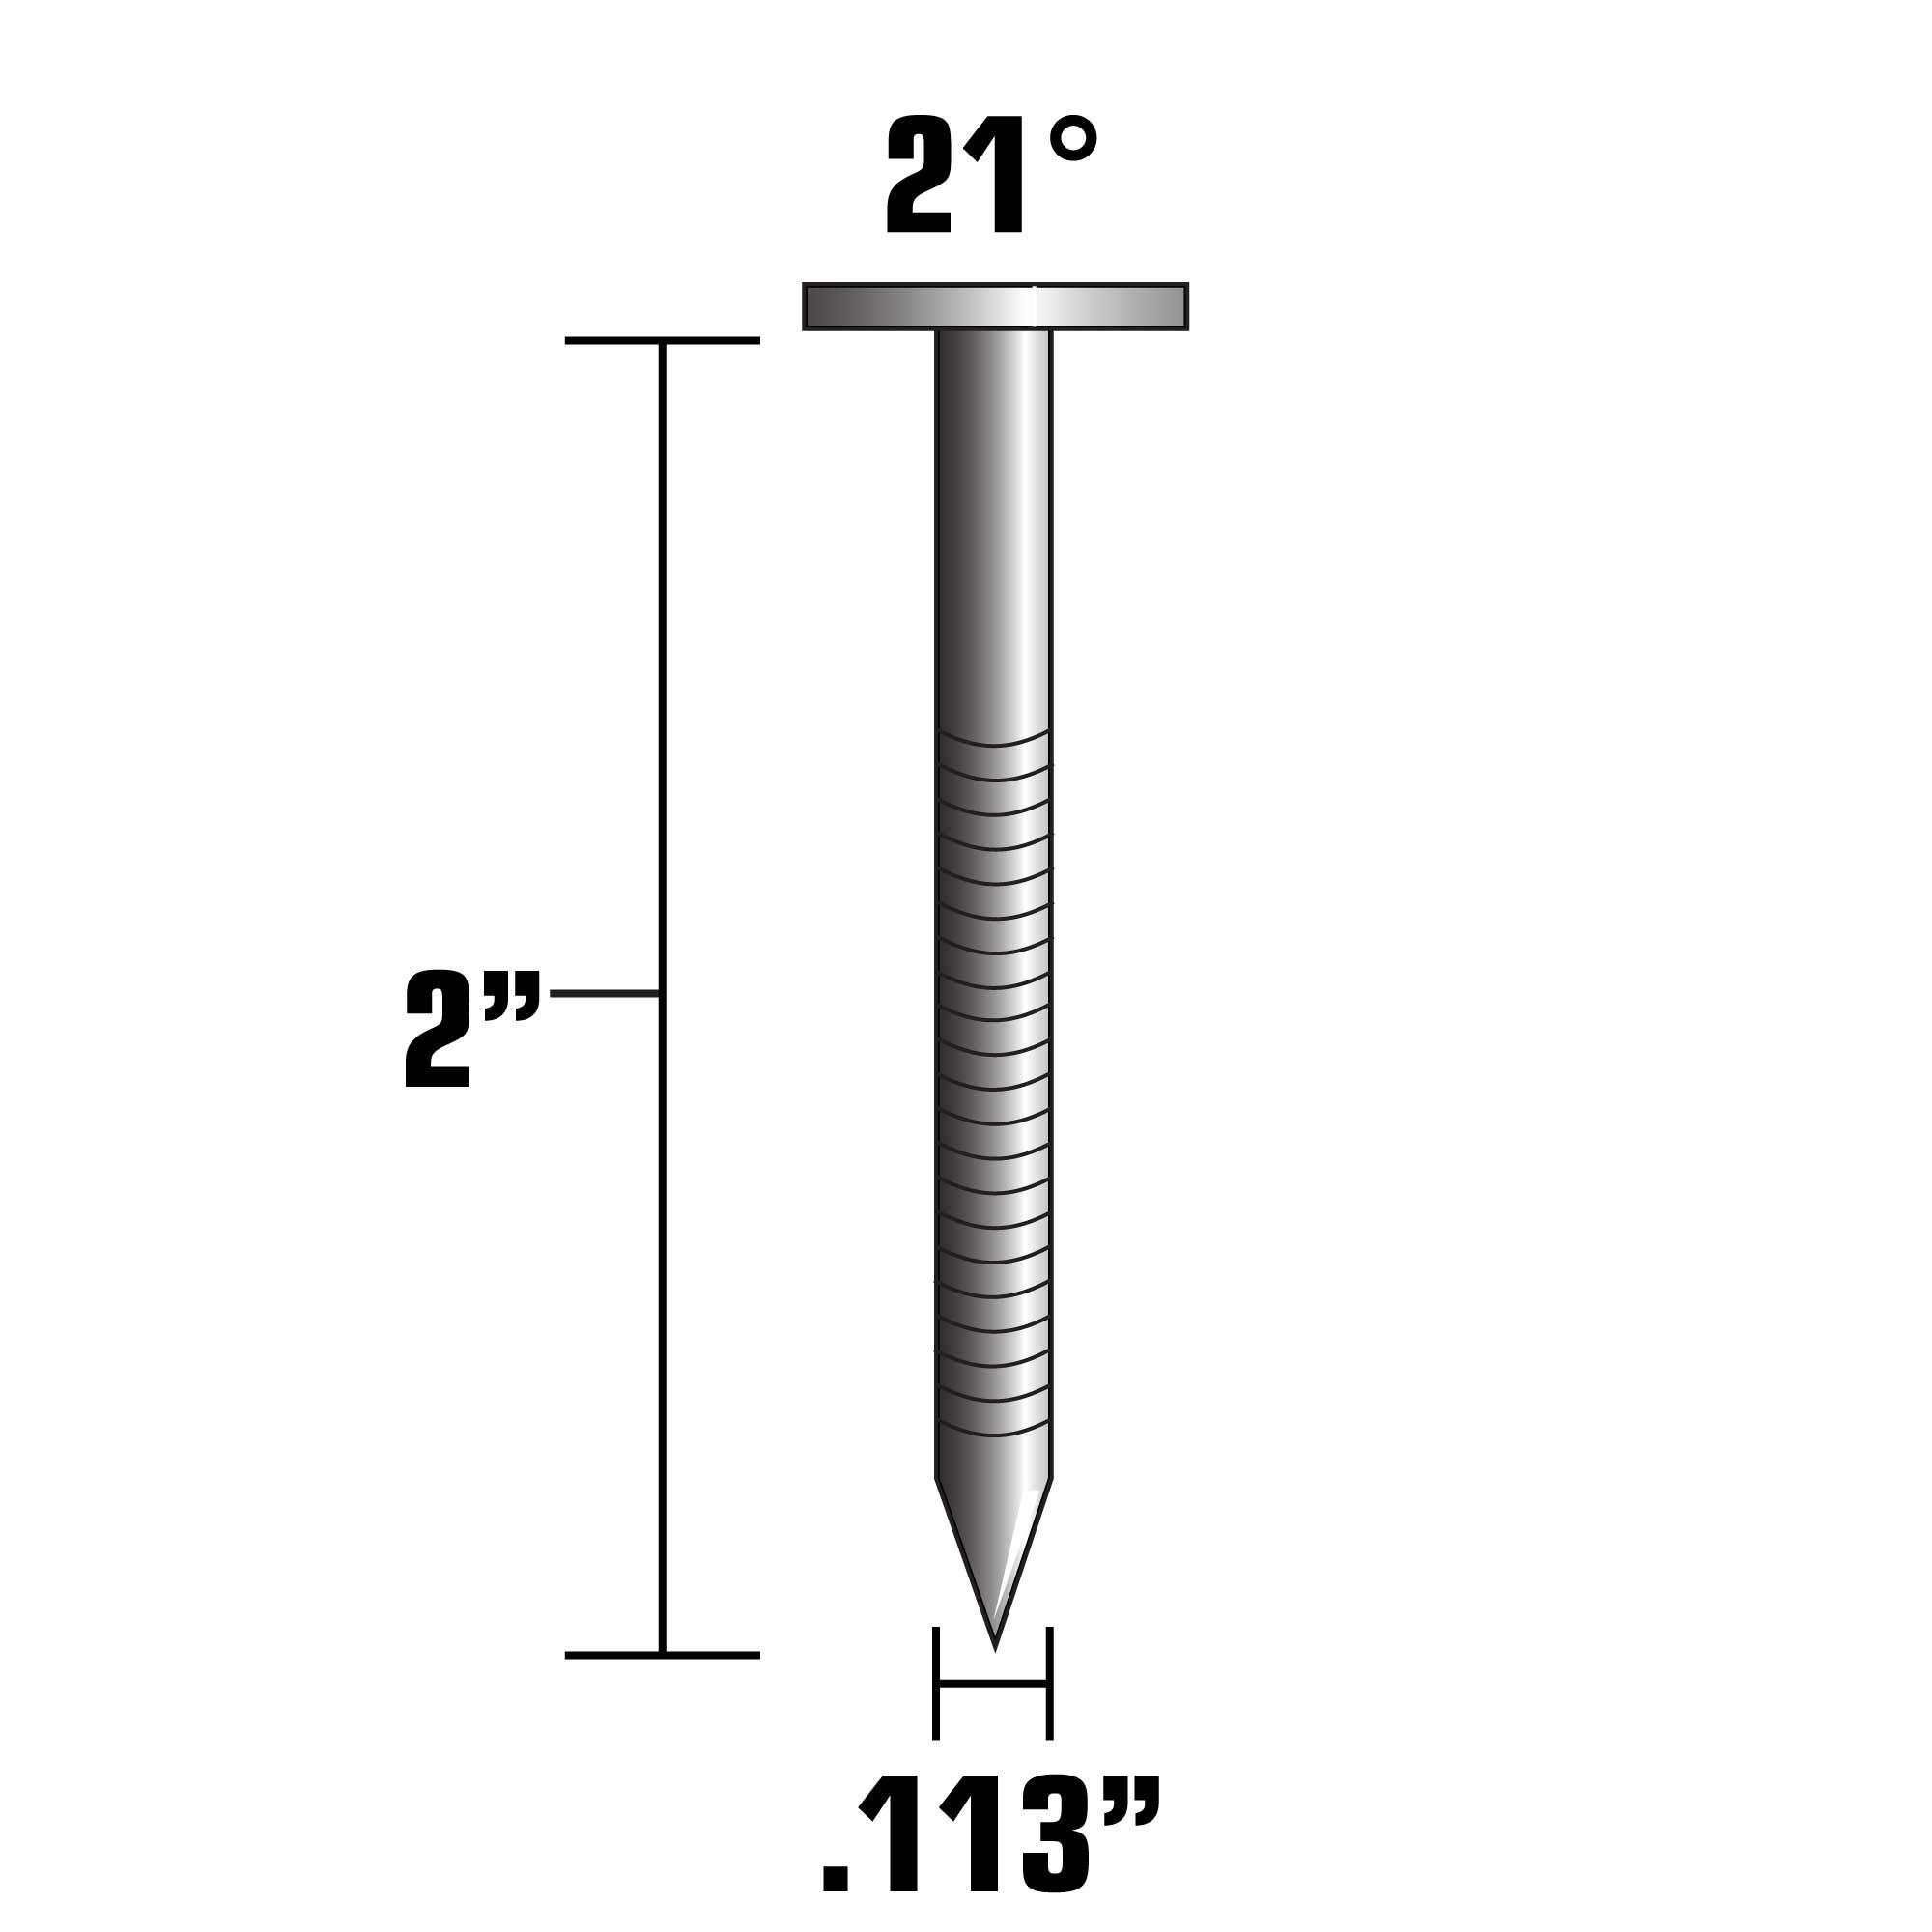 Metabo HPT Framing Nails | 2 In. x 0.113 | 21 Degree | Full Round Head | Hot Dipped Galvanized | Ring Shank | 1,000 Count | 20171SHPT